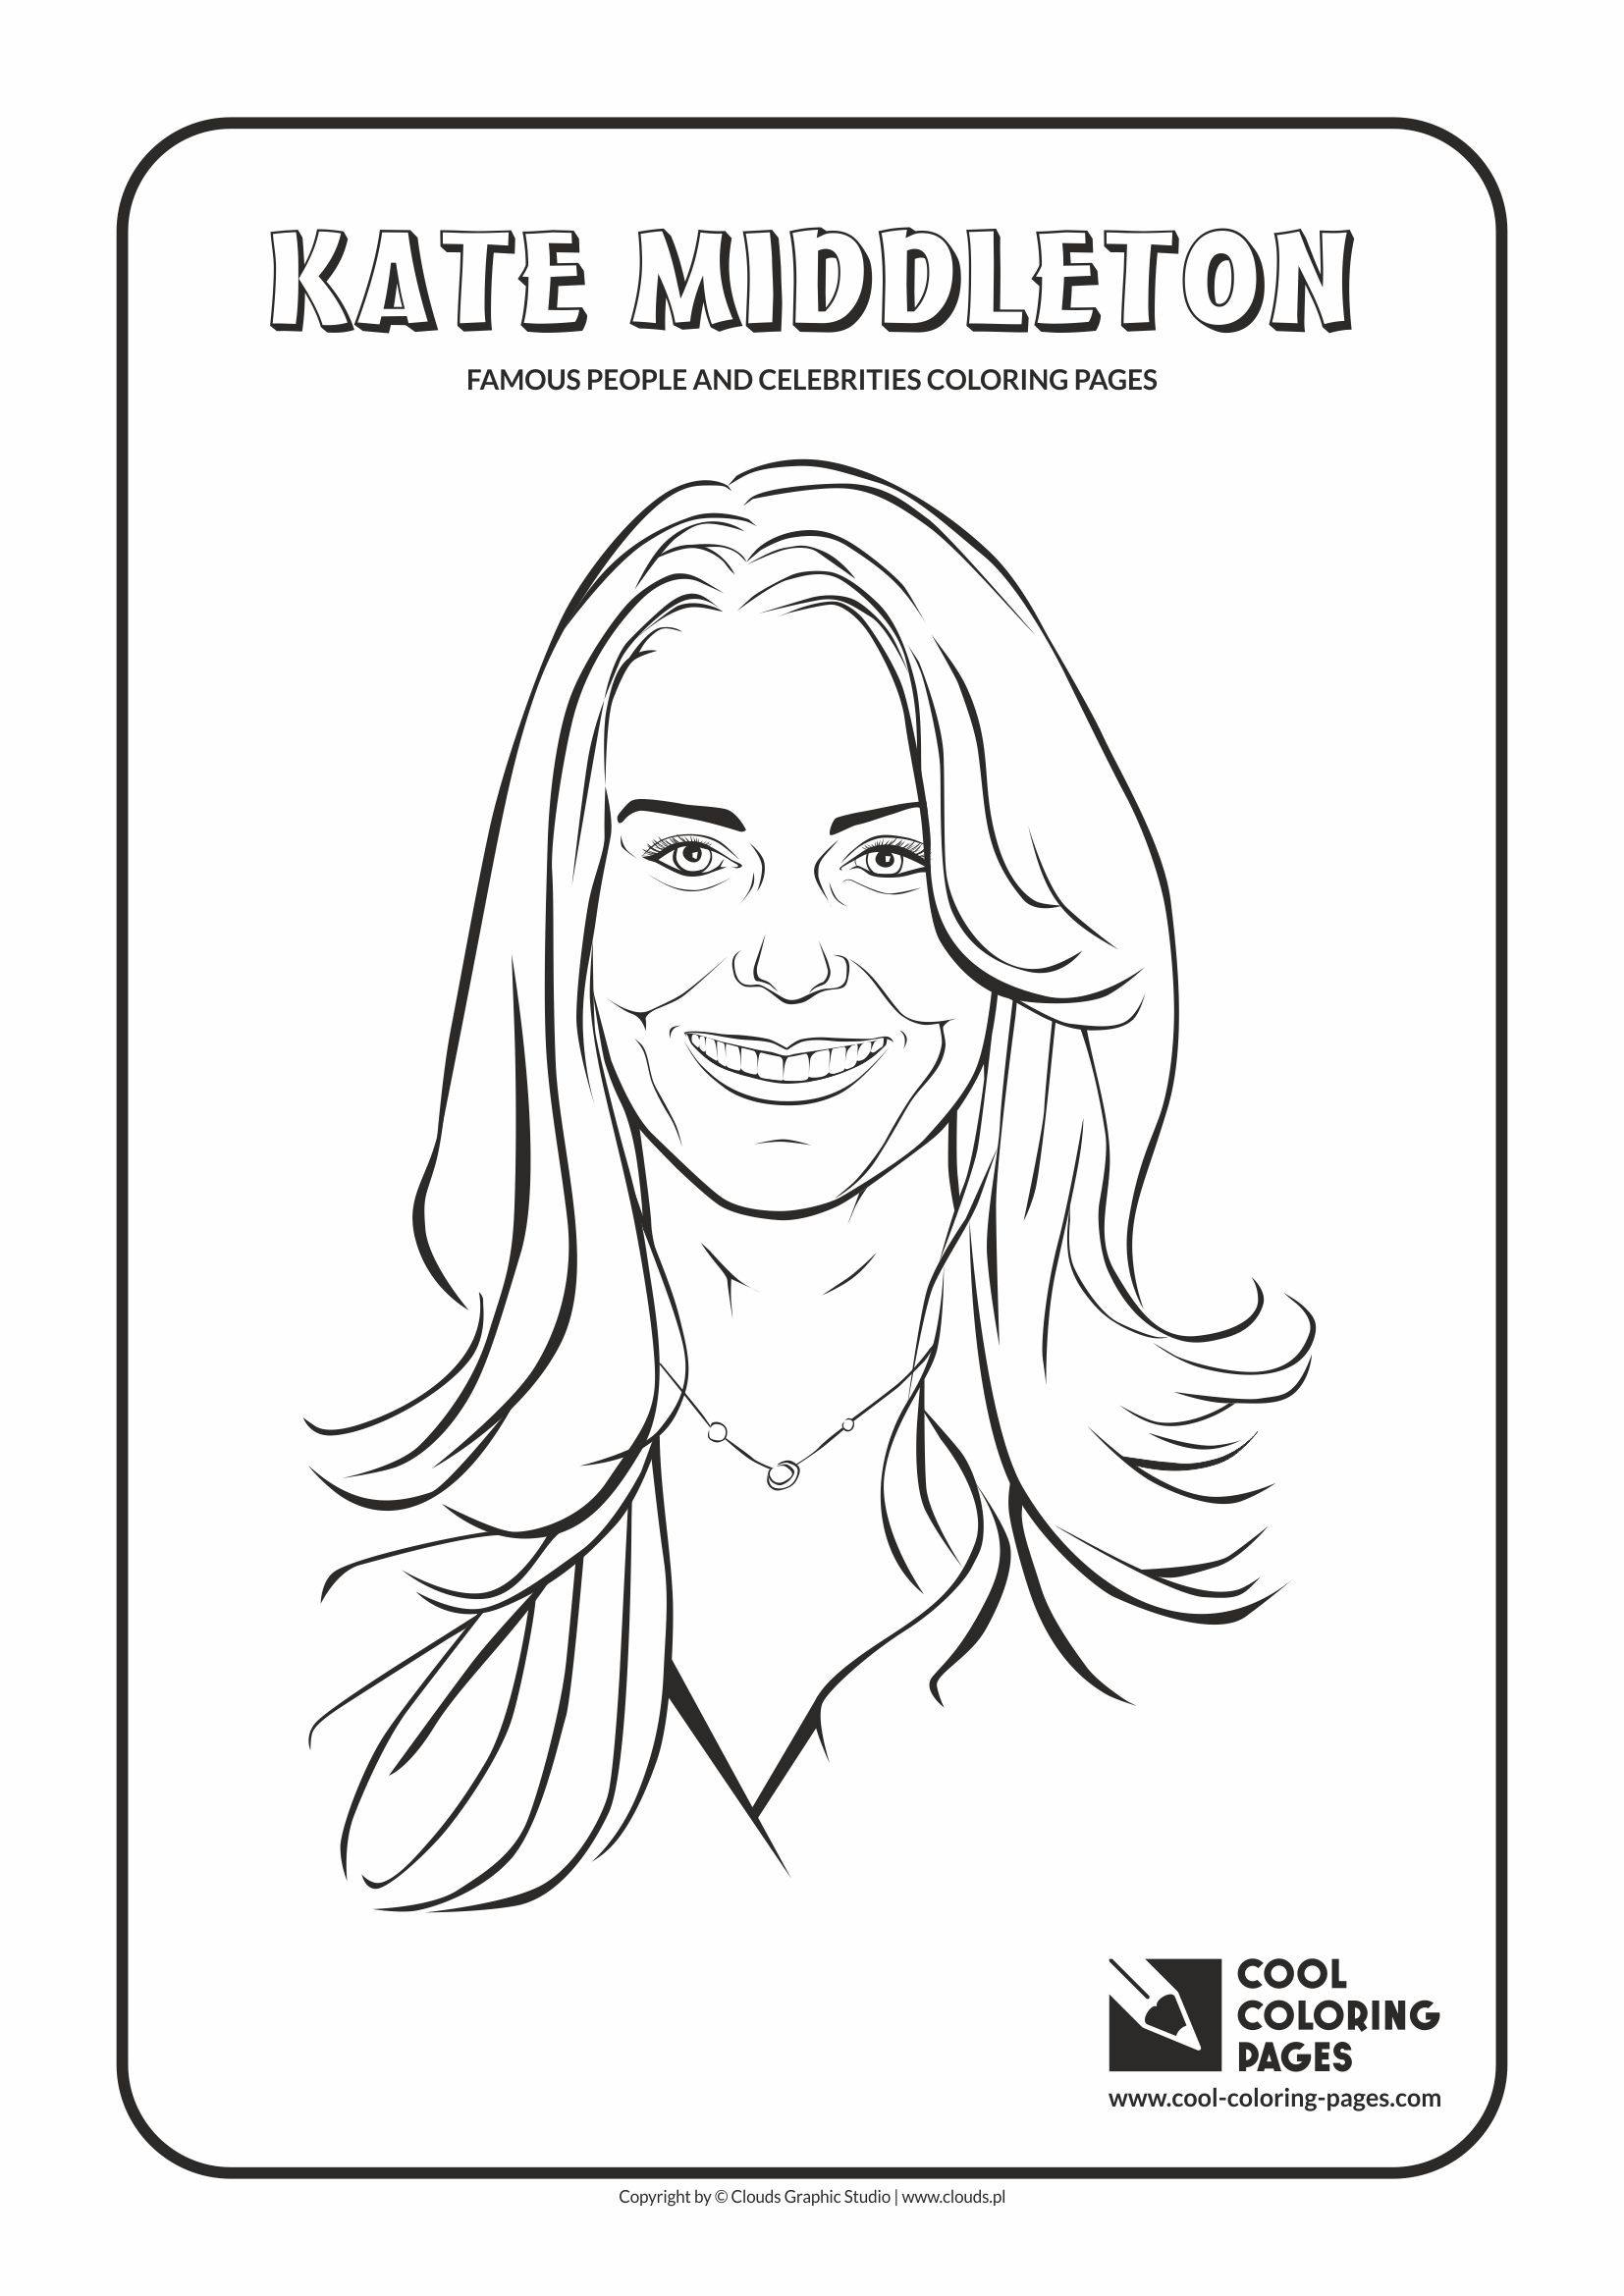 Download Cool Coloring Pages Famous people and celebrities - Cool Coloring Pages | Free educational ...